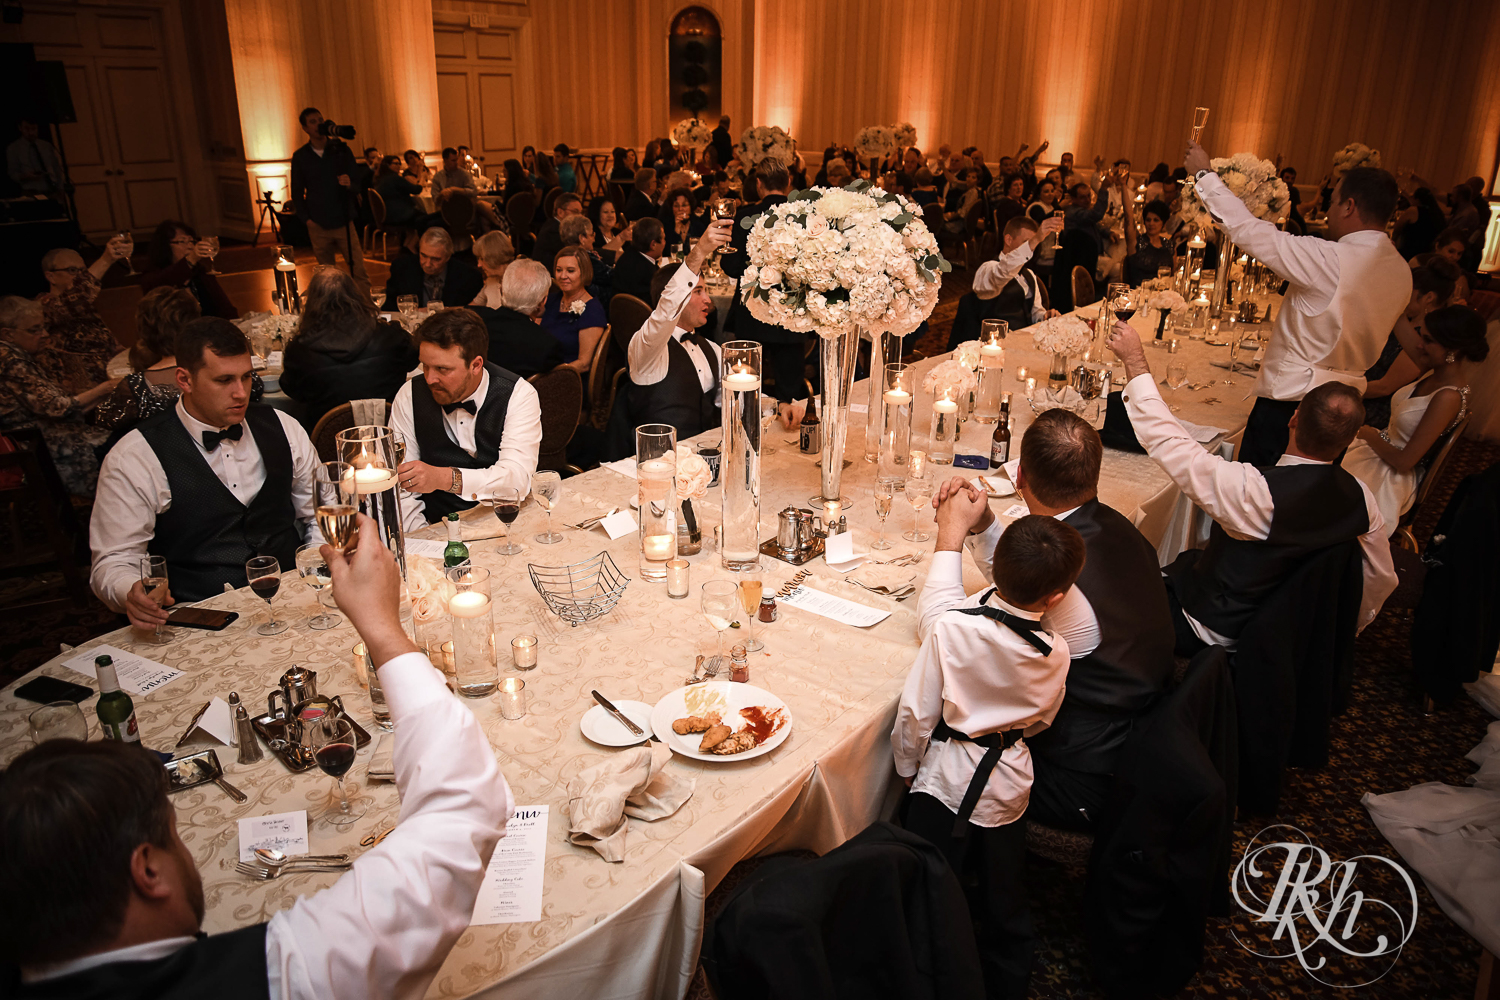 Head table toasts during speeches at The Saint Paul Hotel in Saint Paul, Minnesota.